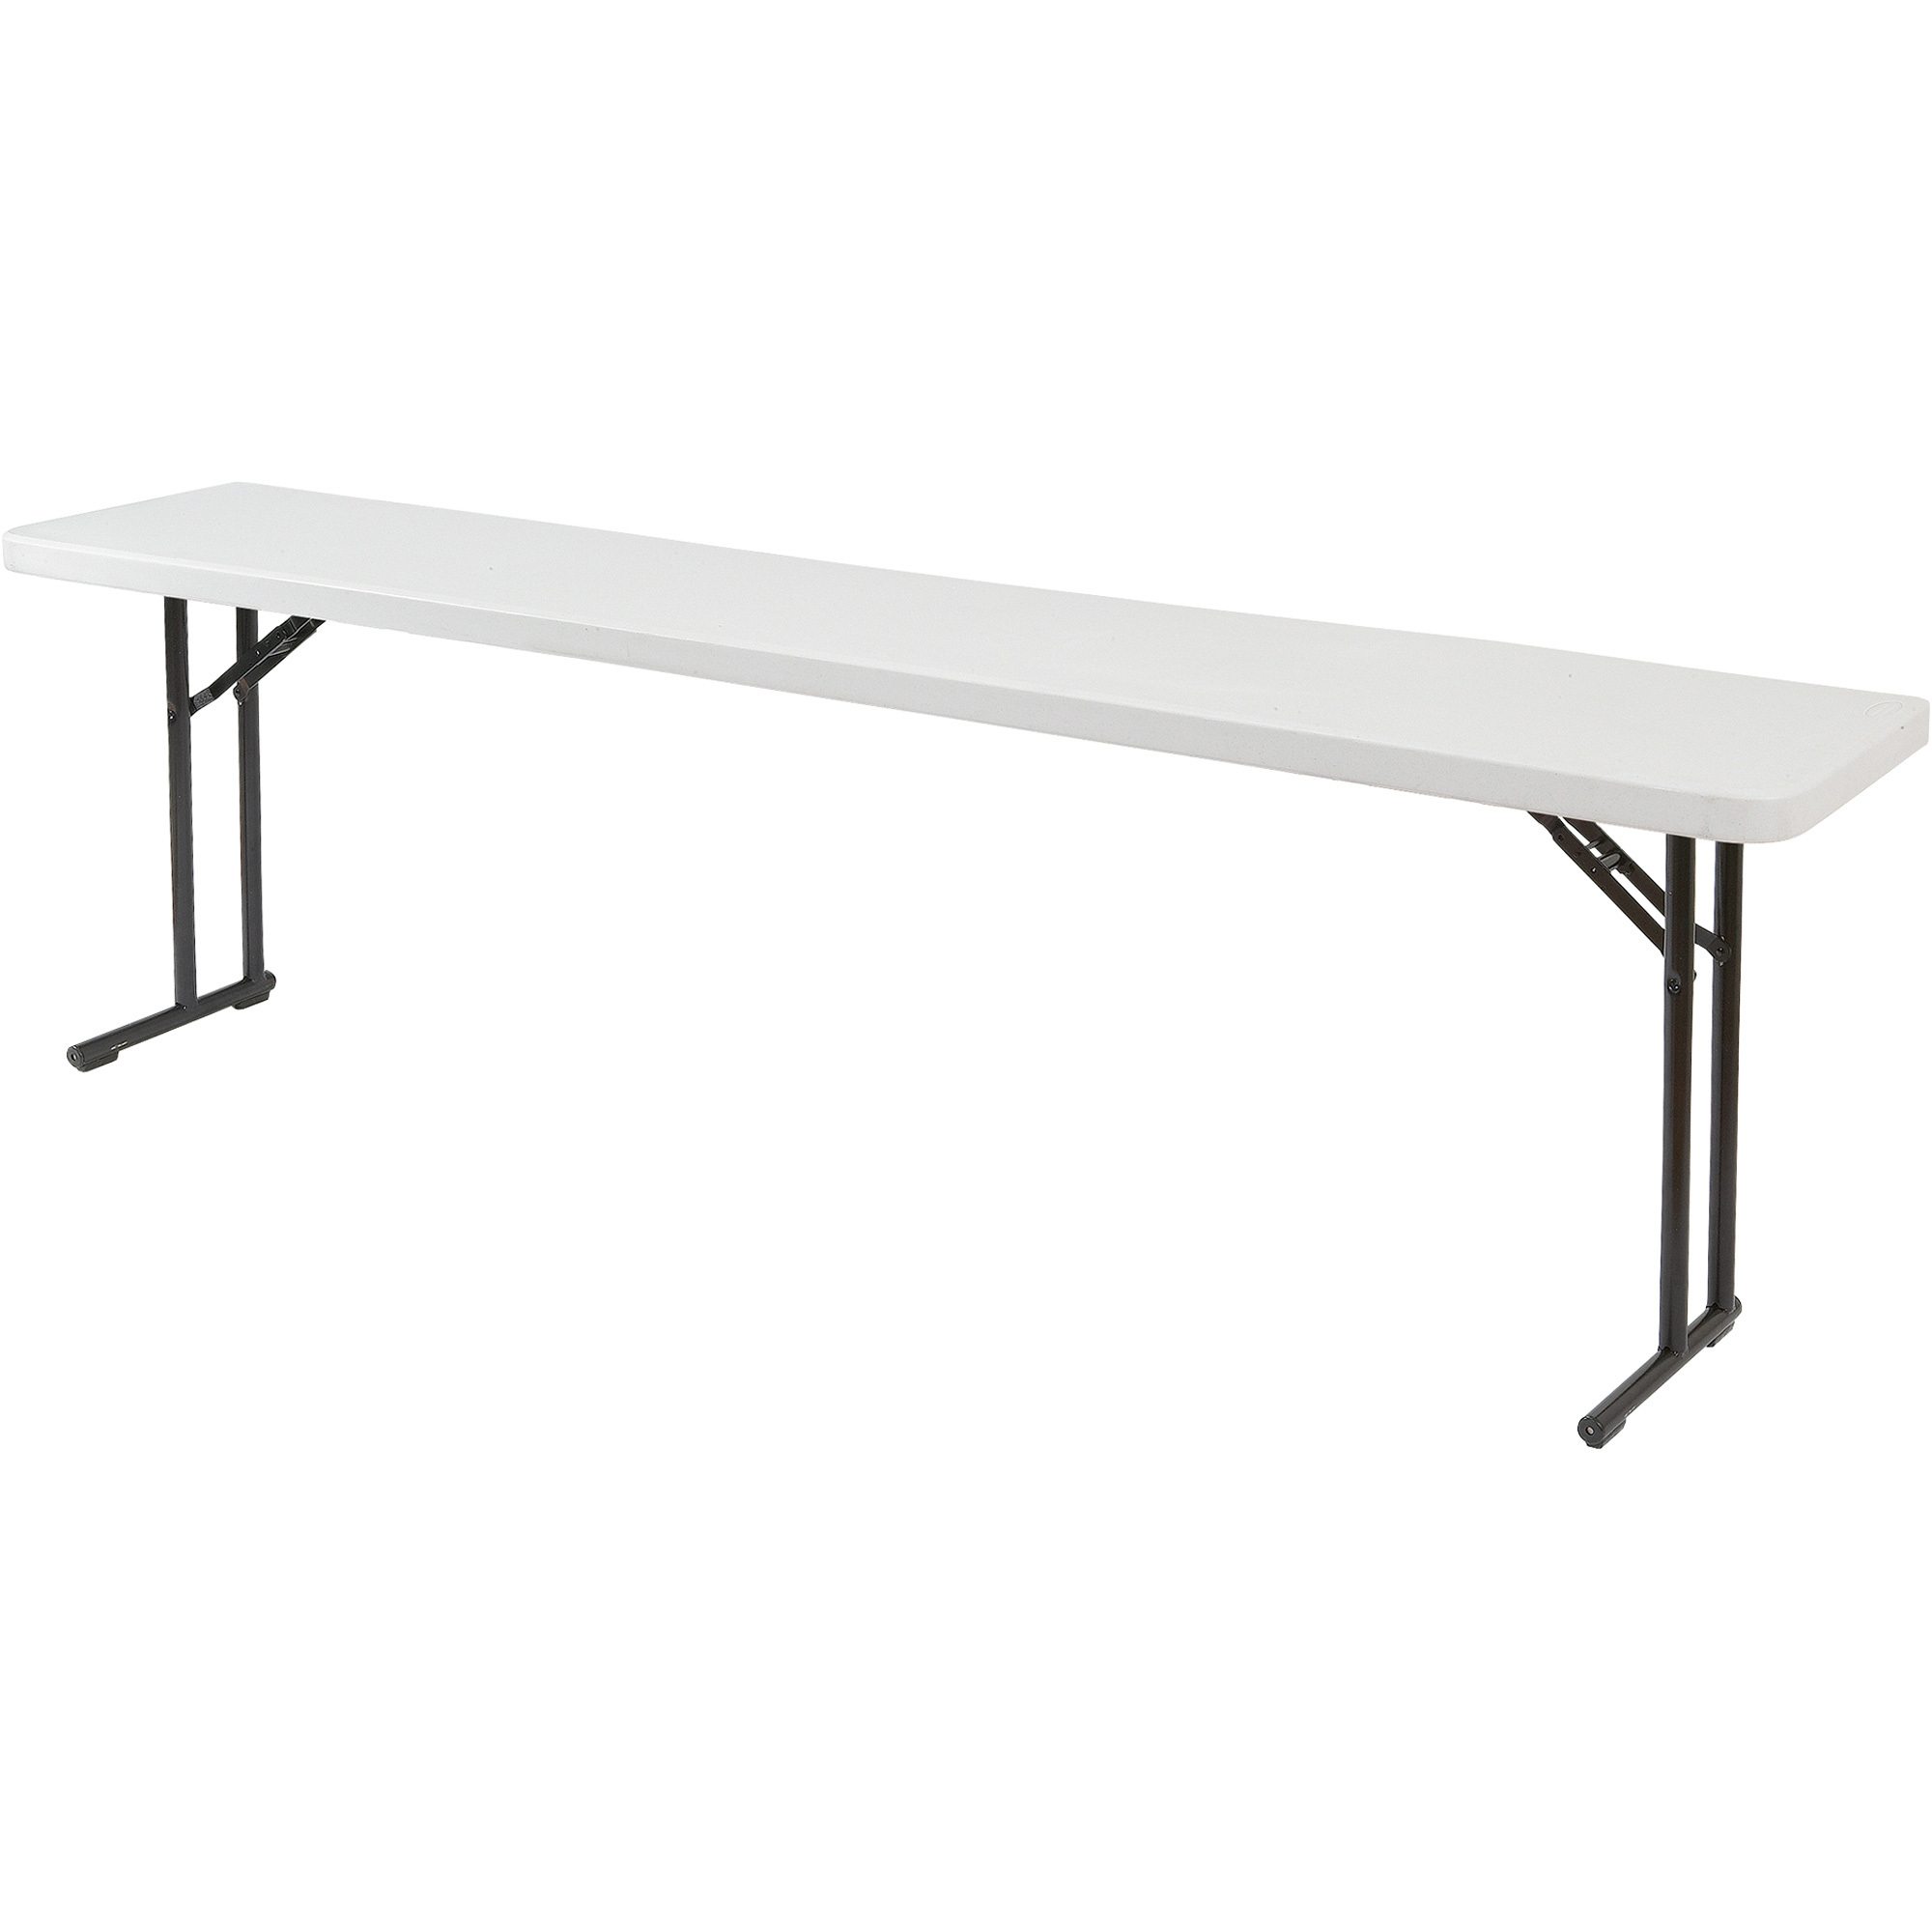 72Inch L x 18Inch W Folding Table — 10-Pack, Gray, Model - National Public Seating BT1872/10